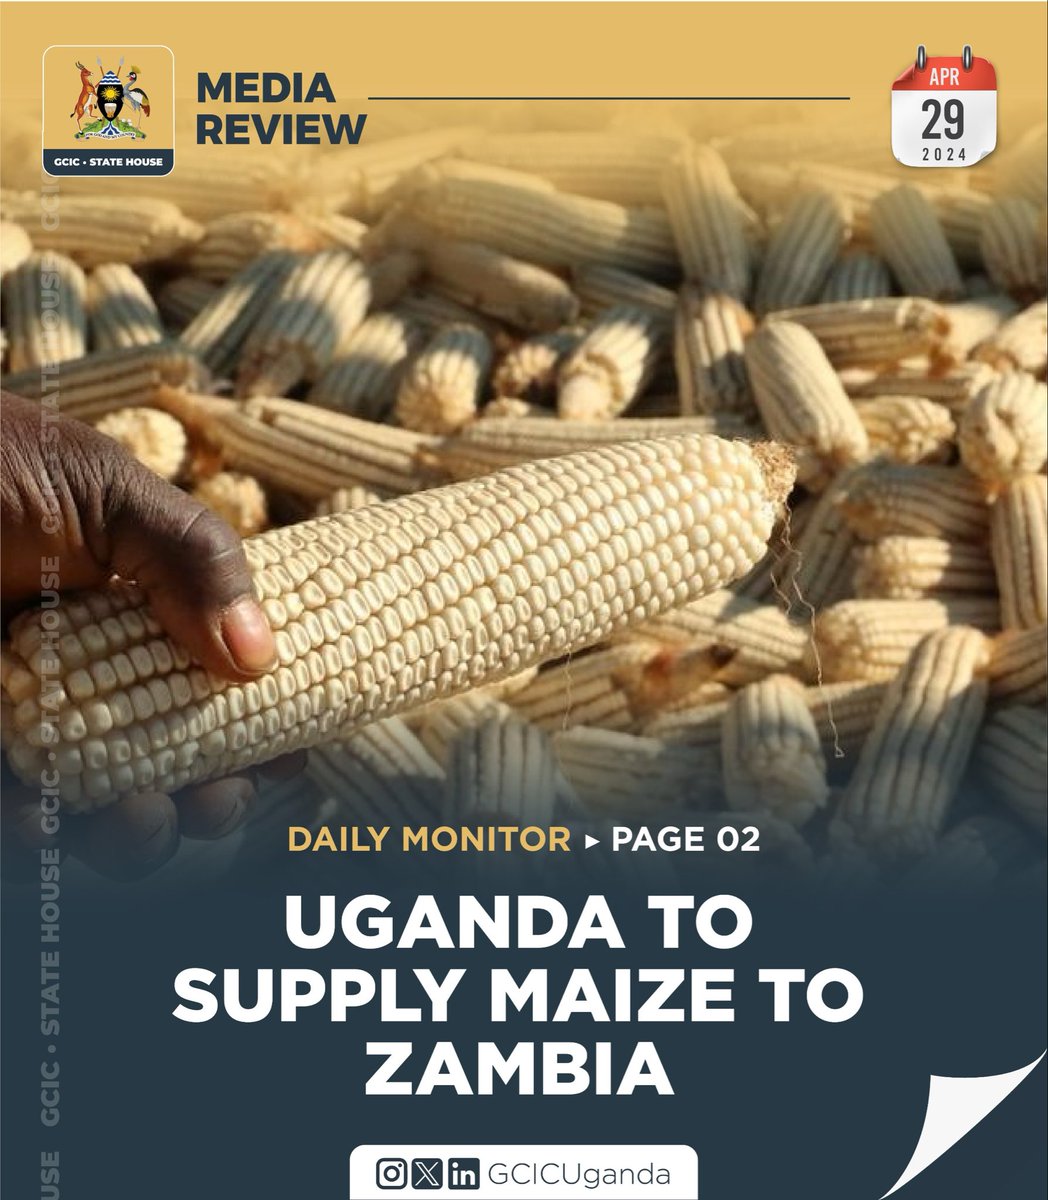 Uganda through @MAAIF_Uganda has agreed to supply 500,000 metric tonnes of maize to Zambia 🇿🇲, which has been hit by a dry spell since mid-January this year. 
#GCICMediaReview #OpenGovUg 

@FrankTumwebazek